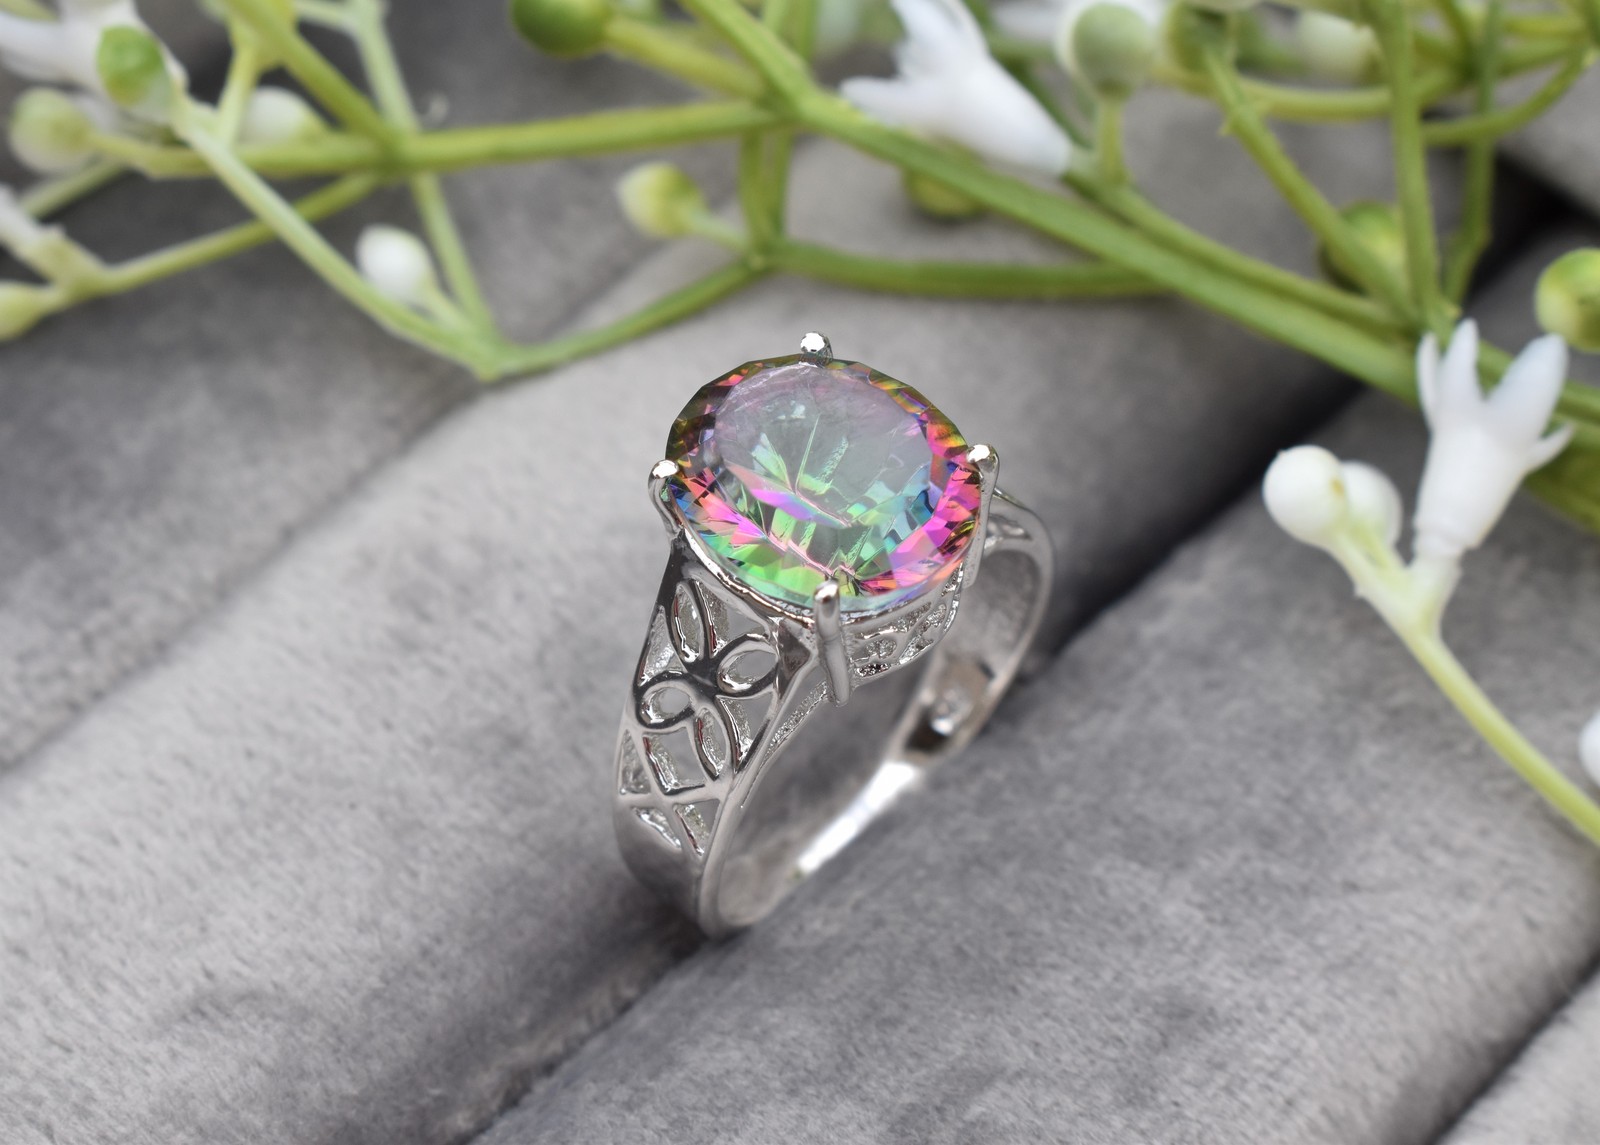 Primary image for Mystic Topaz Ring, 925 Sterling Silver Ring, Gold Plated, Statement Ring,GIFT